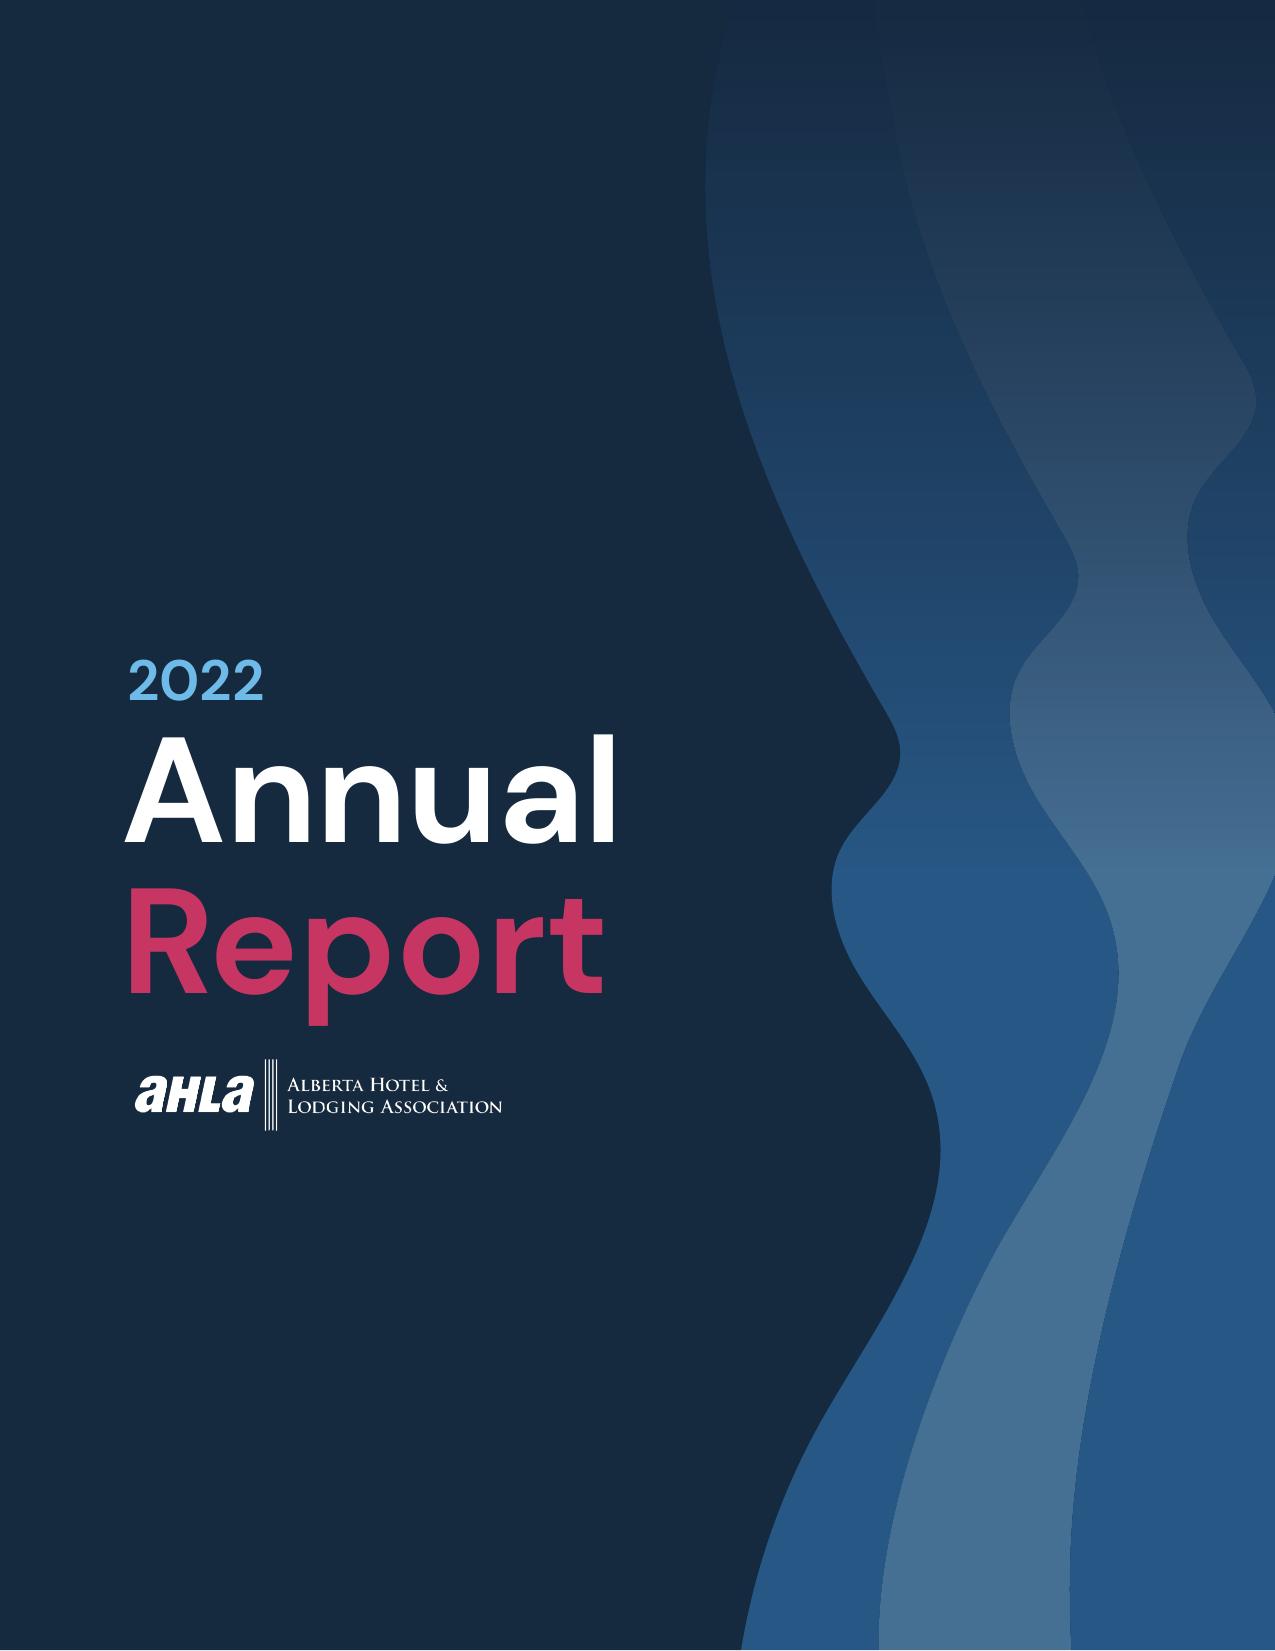 ACDS 2023 Annual Report